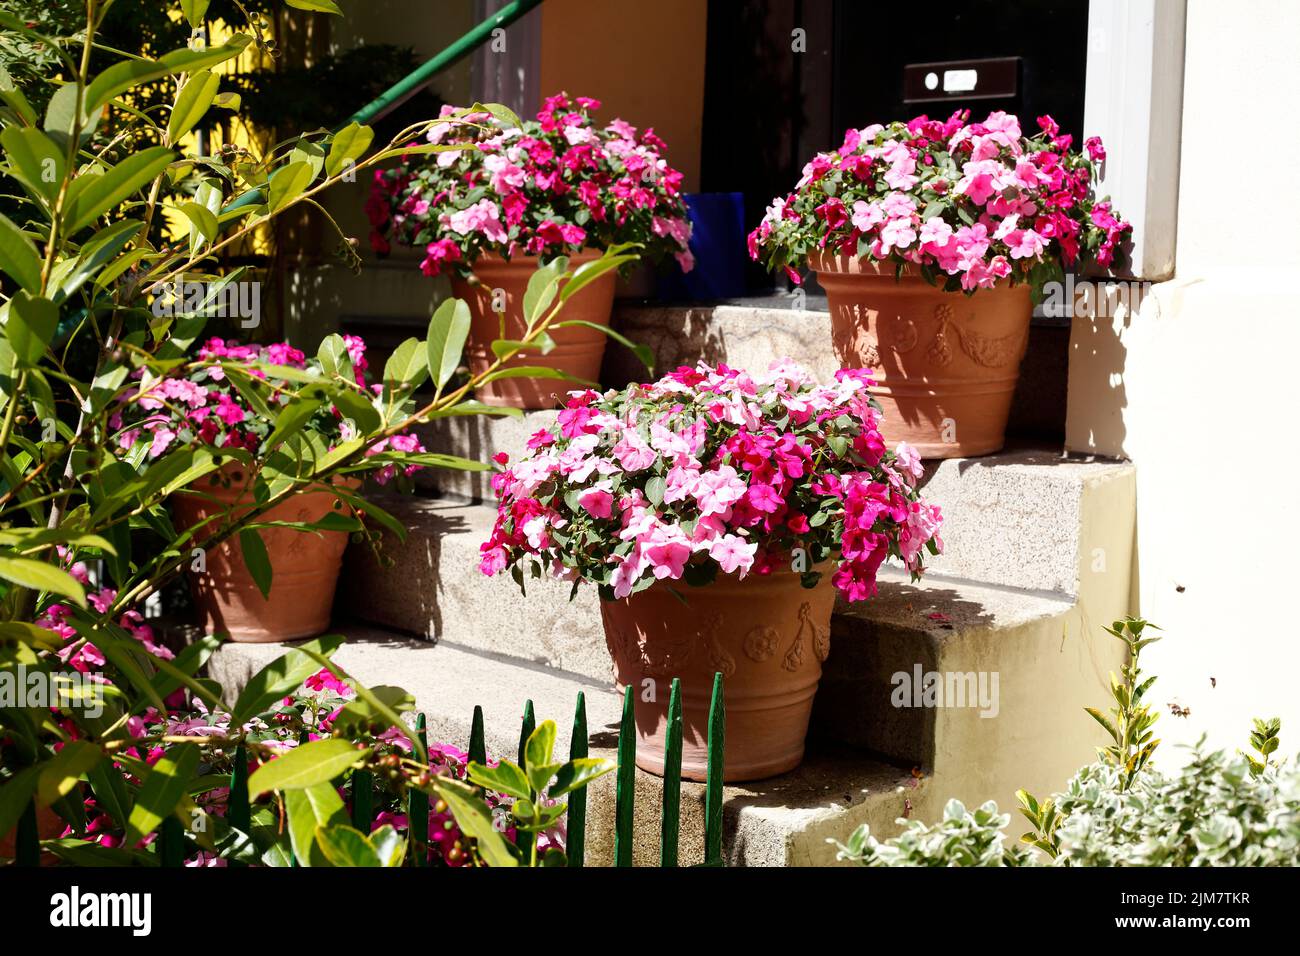 Stairs with flower pots, Bremen, Germany Stock Photo